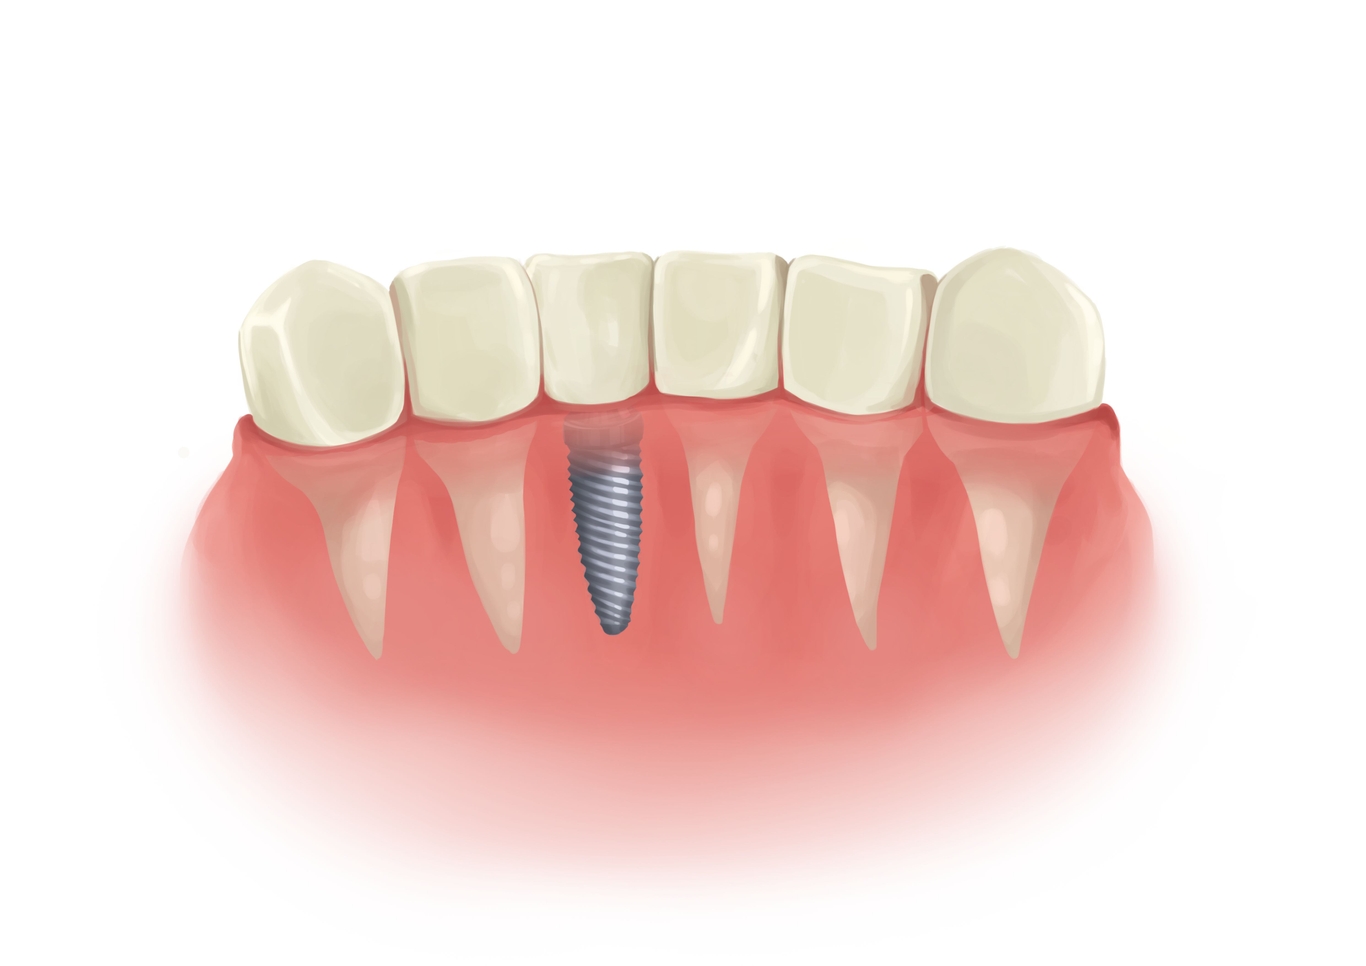 Dental implants cost from $3,500 up to $28,000